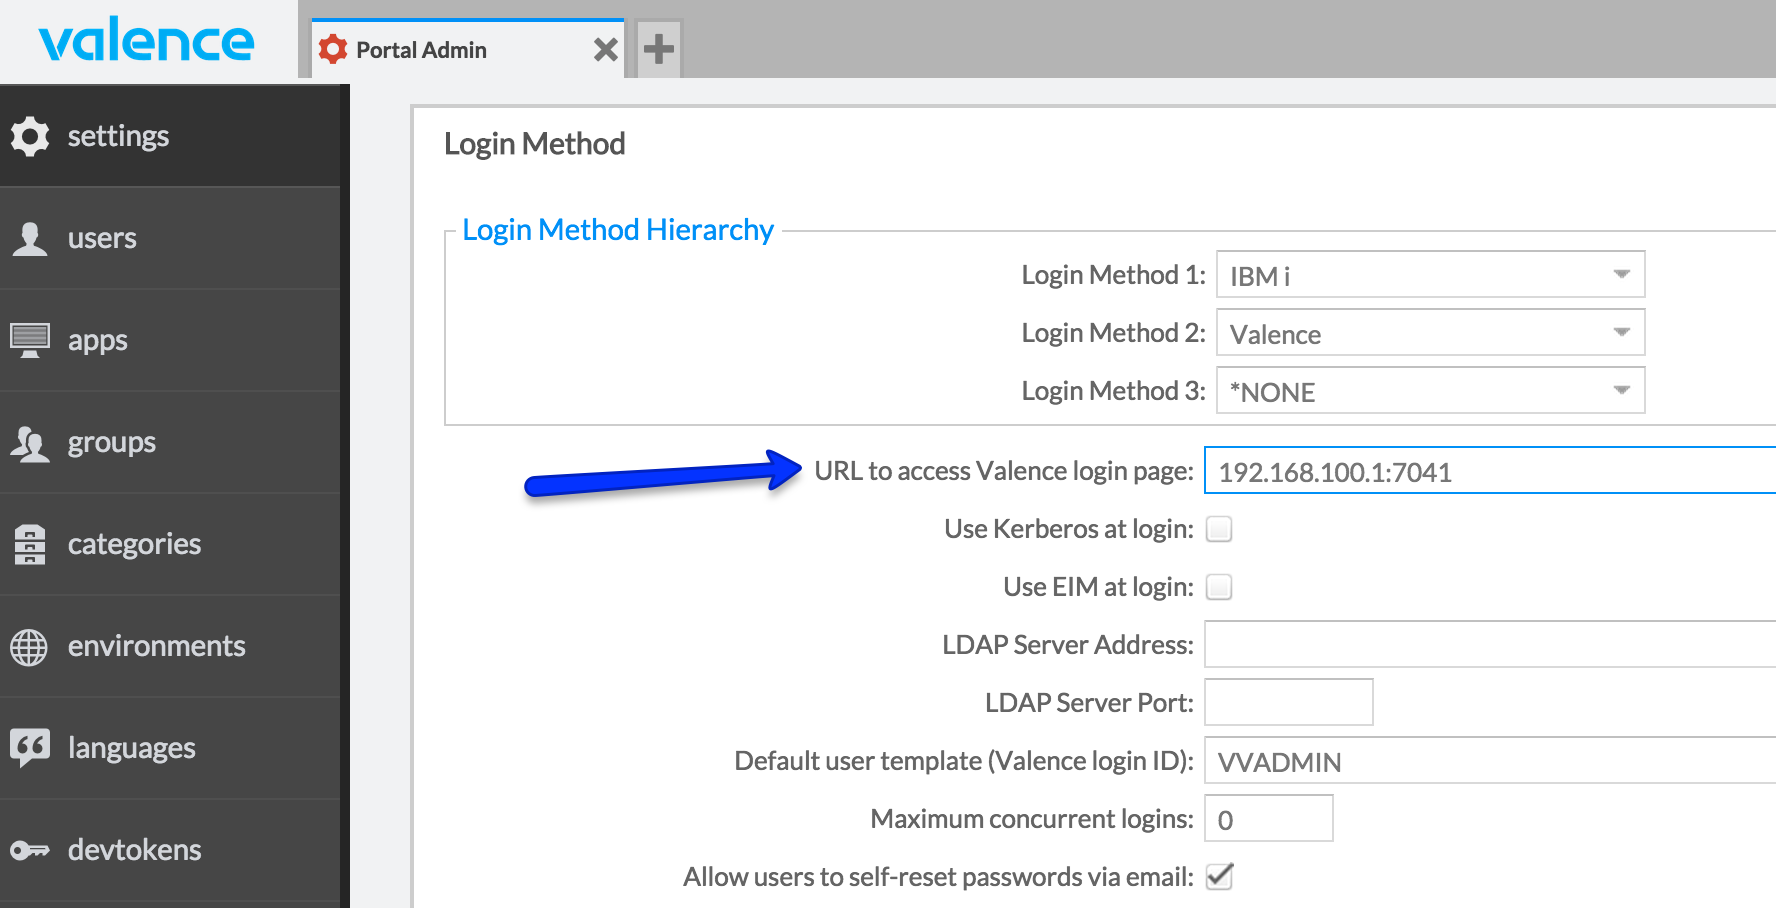 Portal Admin > Settings - Ensure you have the correct URL for accessing your Valence instance